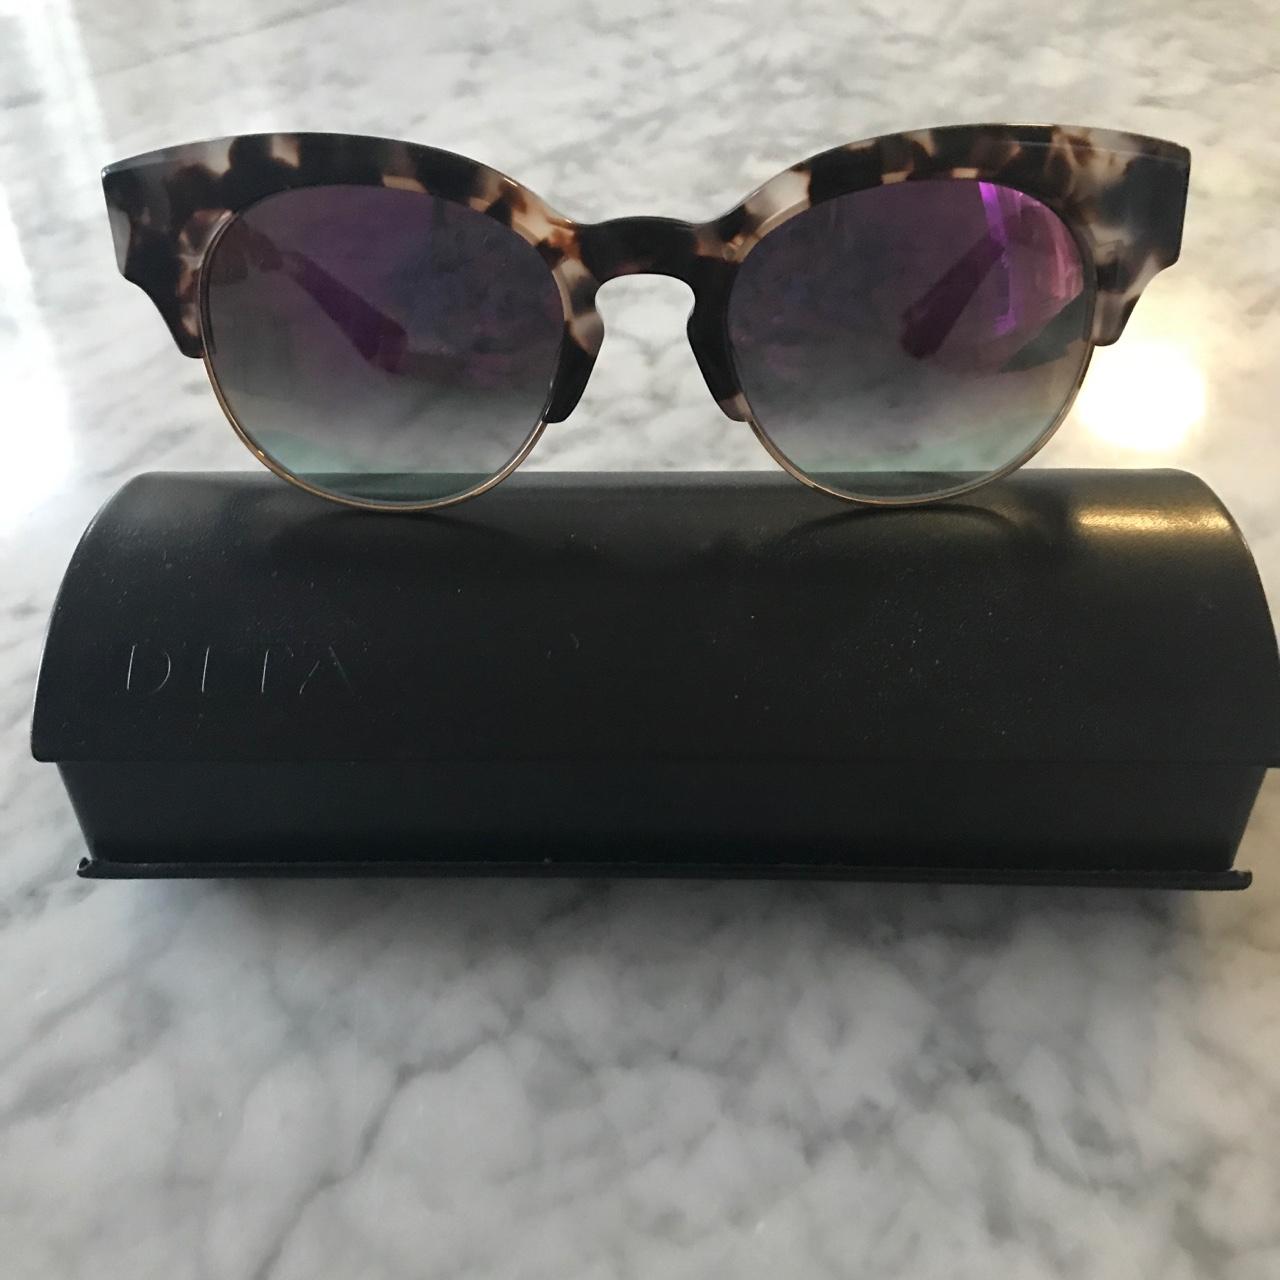 BRAND NEW Dita Liberty sunglasses. Only worn for... - Depop